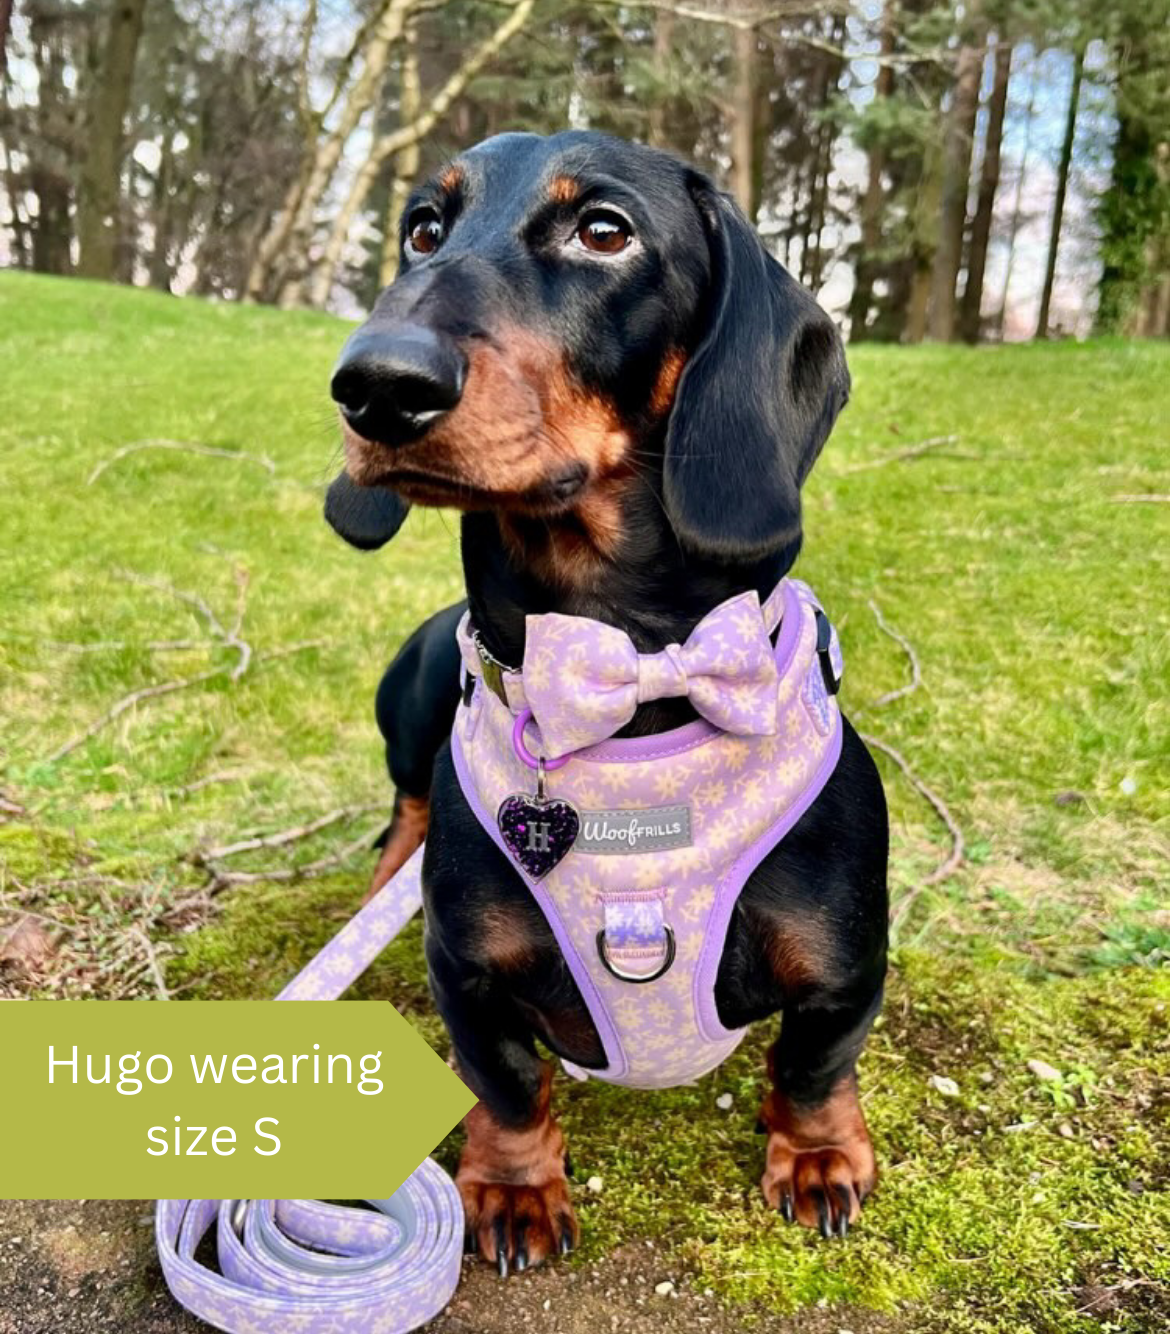 Dachsund wearing a lilac harness for dogs